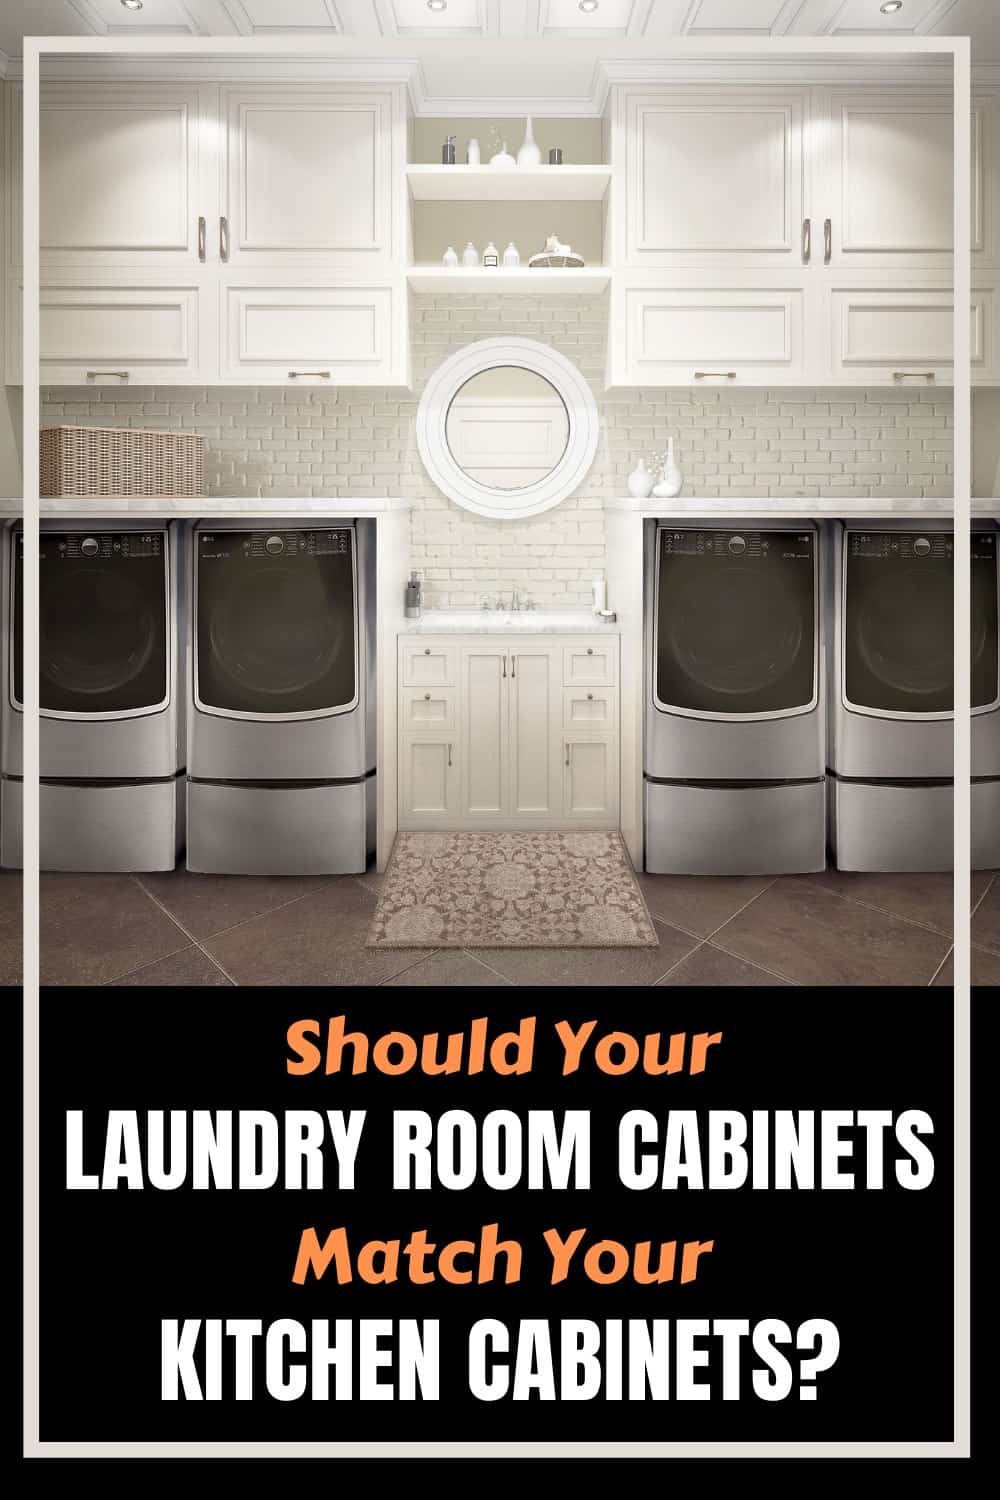 laundry room cabinets do not need to match kitchen cabinets